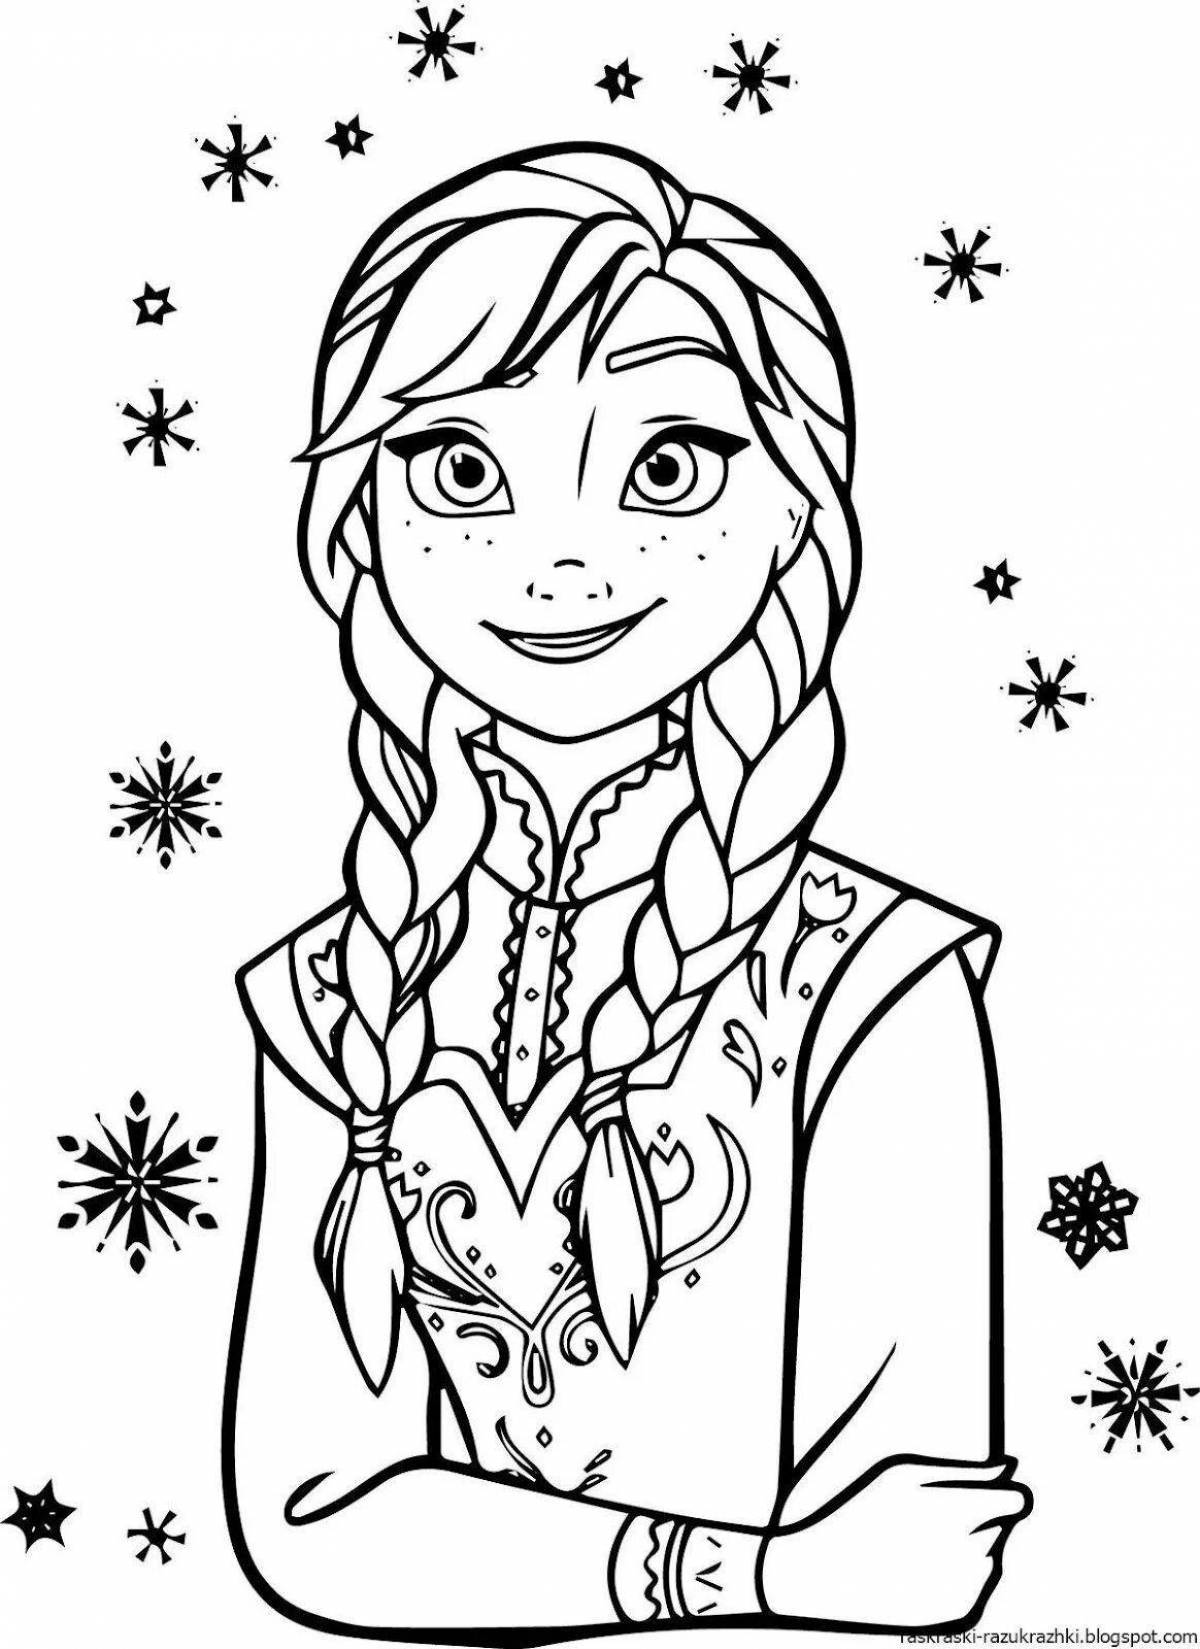 Elsa's wonderful coloring book for children 4-5 years old